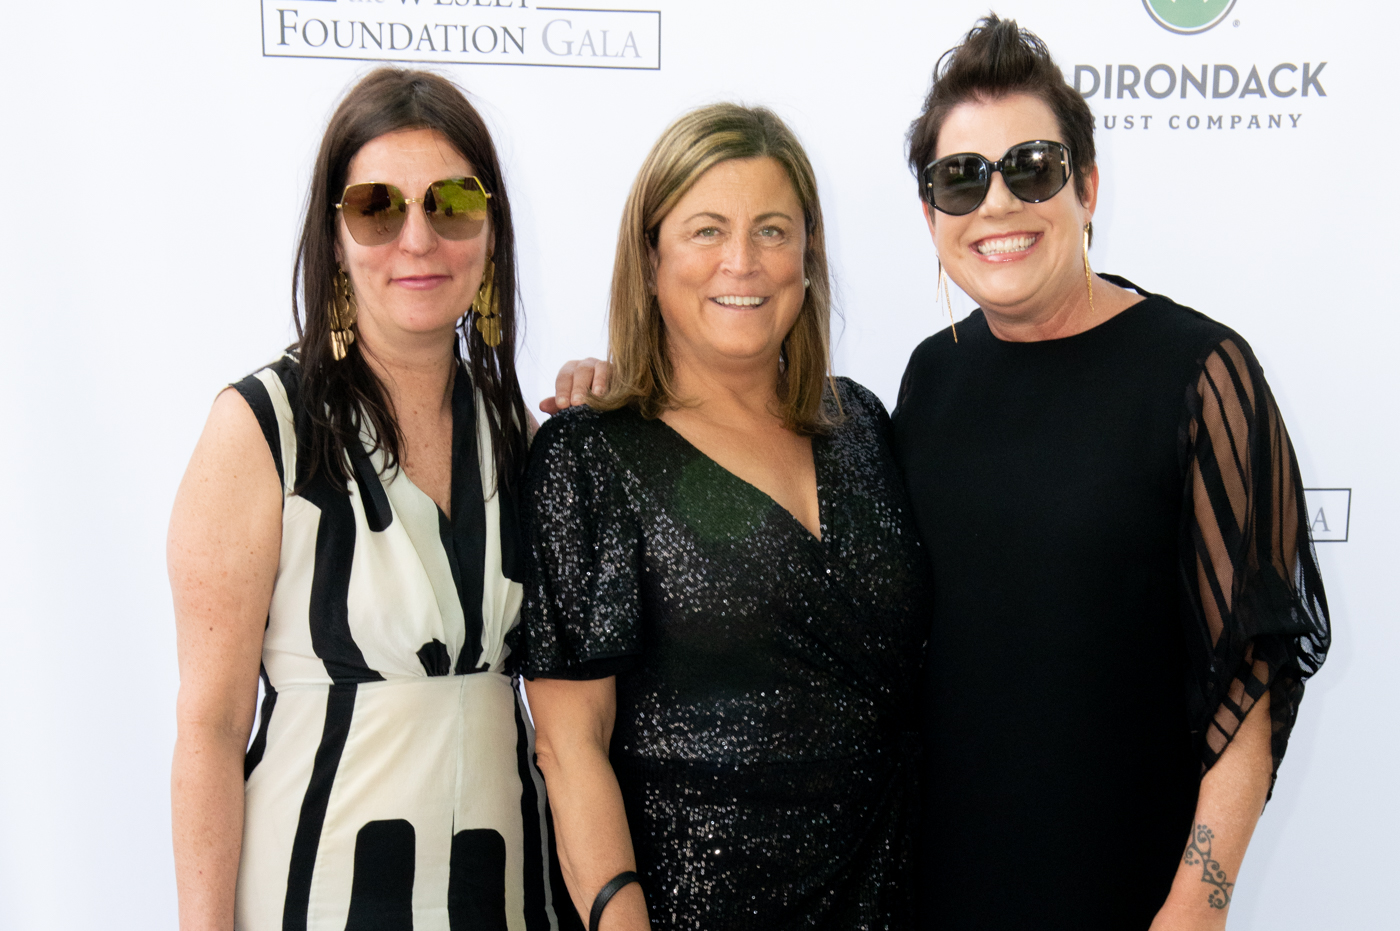 A set of three women, from left to right wearing a black and white dress, a sparkling black dress, and a black dress.